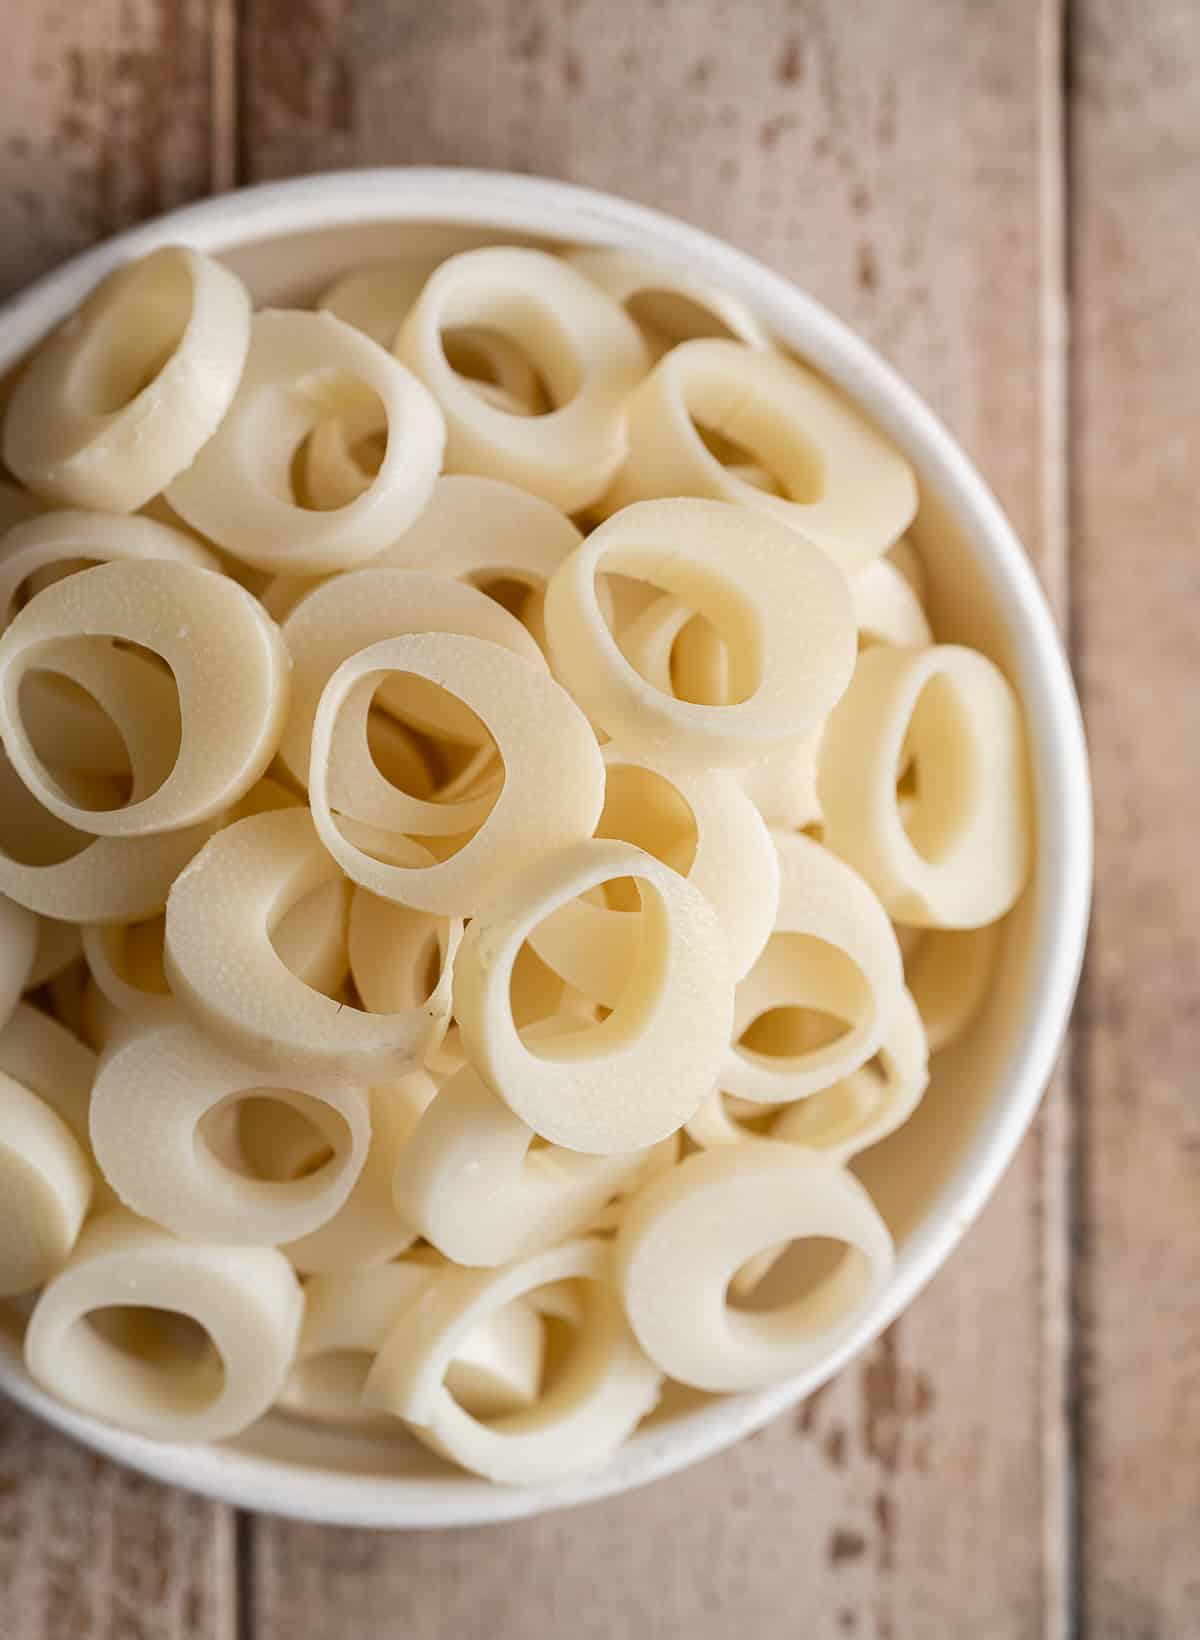 hearts of palm sliced into rings in a bowl.